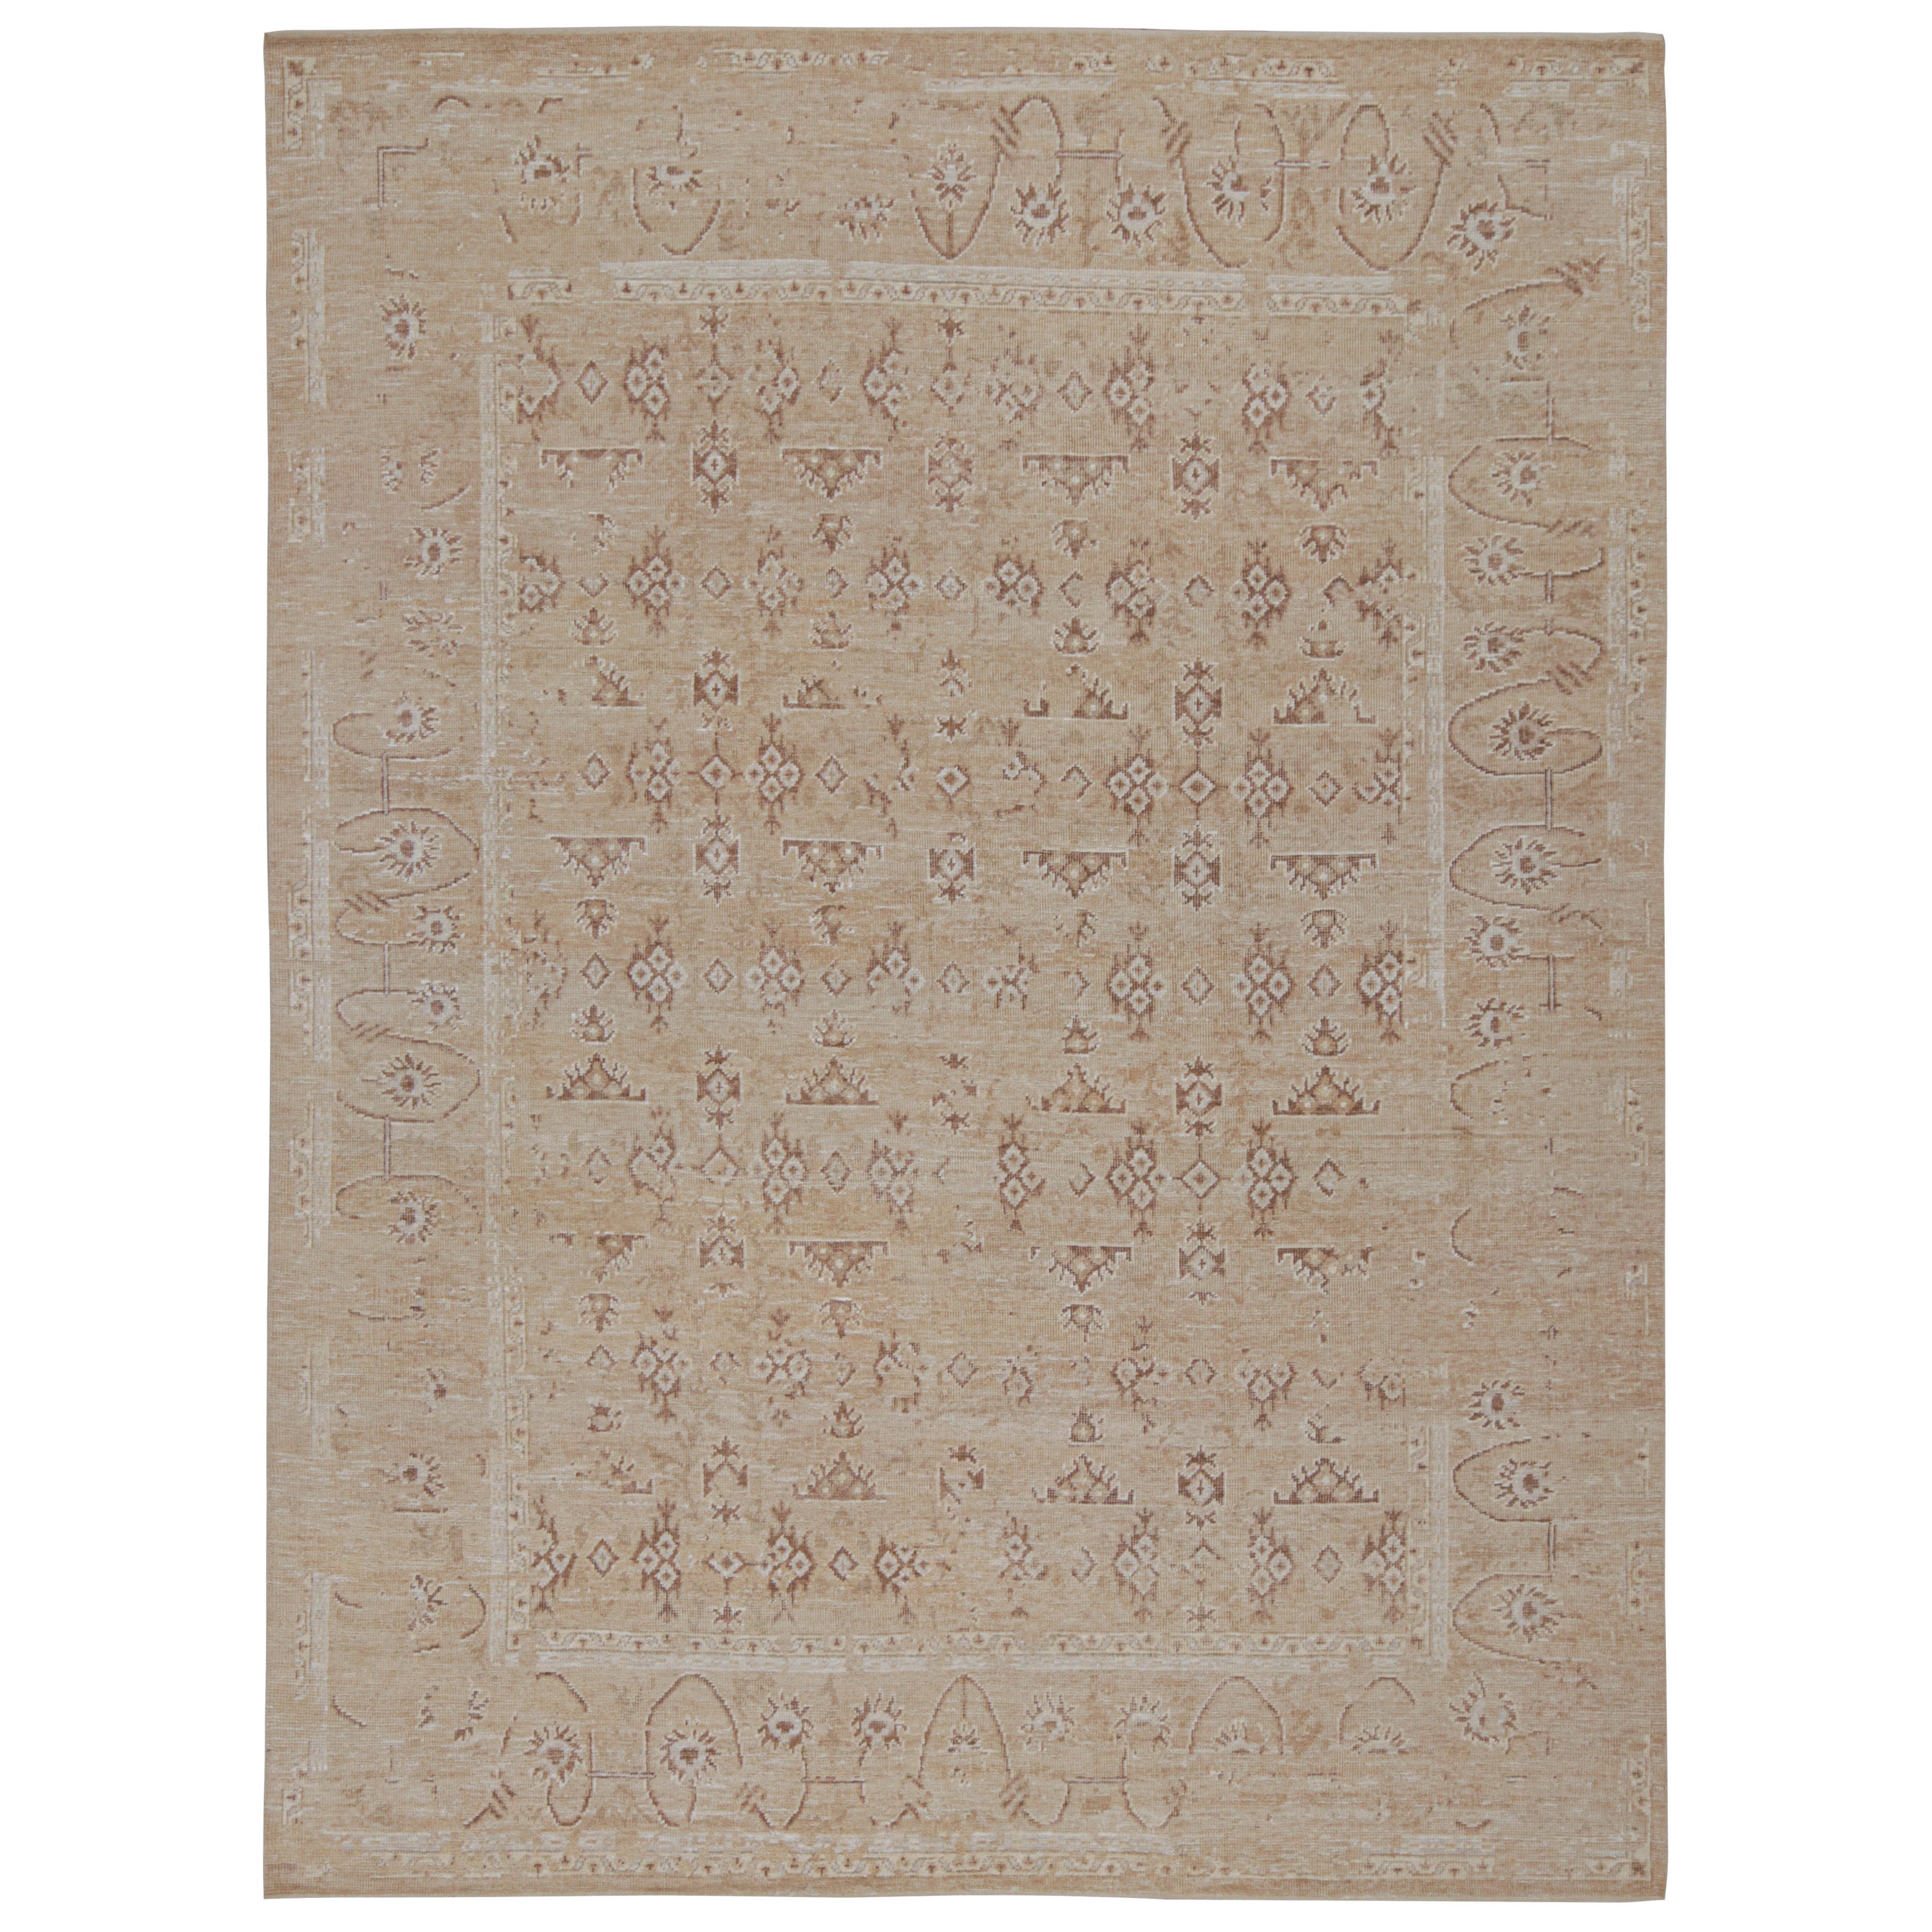 Rug & Kilim’s Oushak Style Rug with Floral Patterns in Tones of Brown For Sale